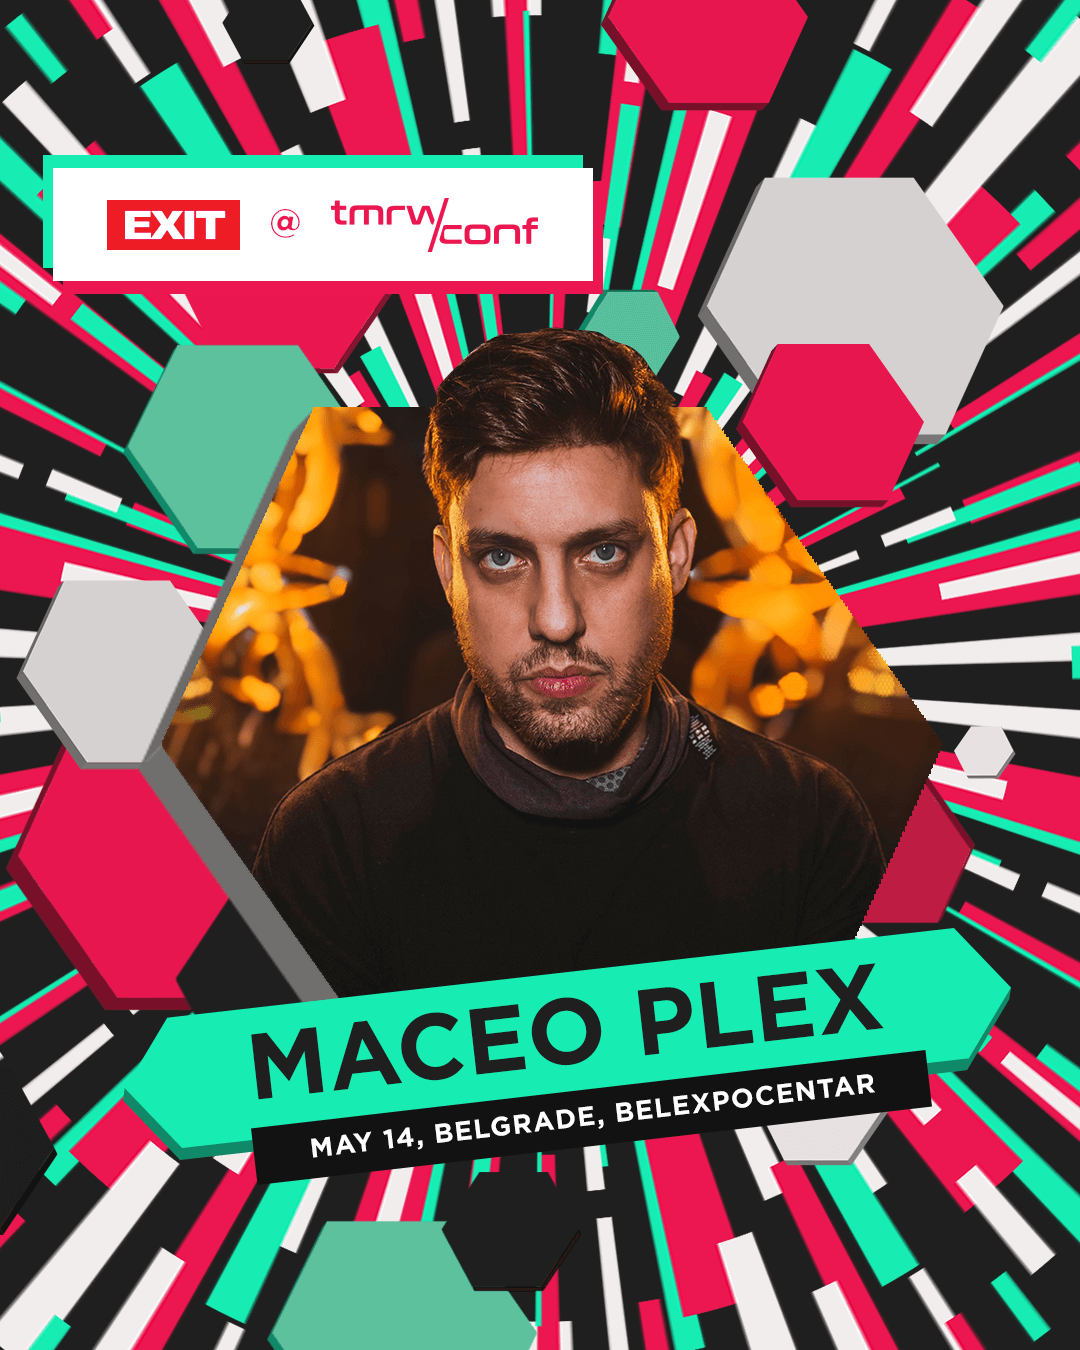 EXIT is releasing an NFT collection with Maceo Plex !